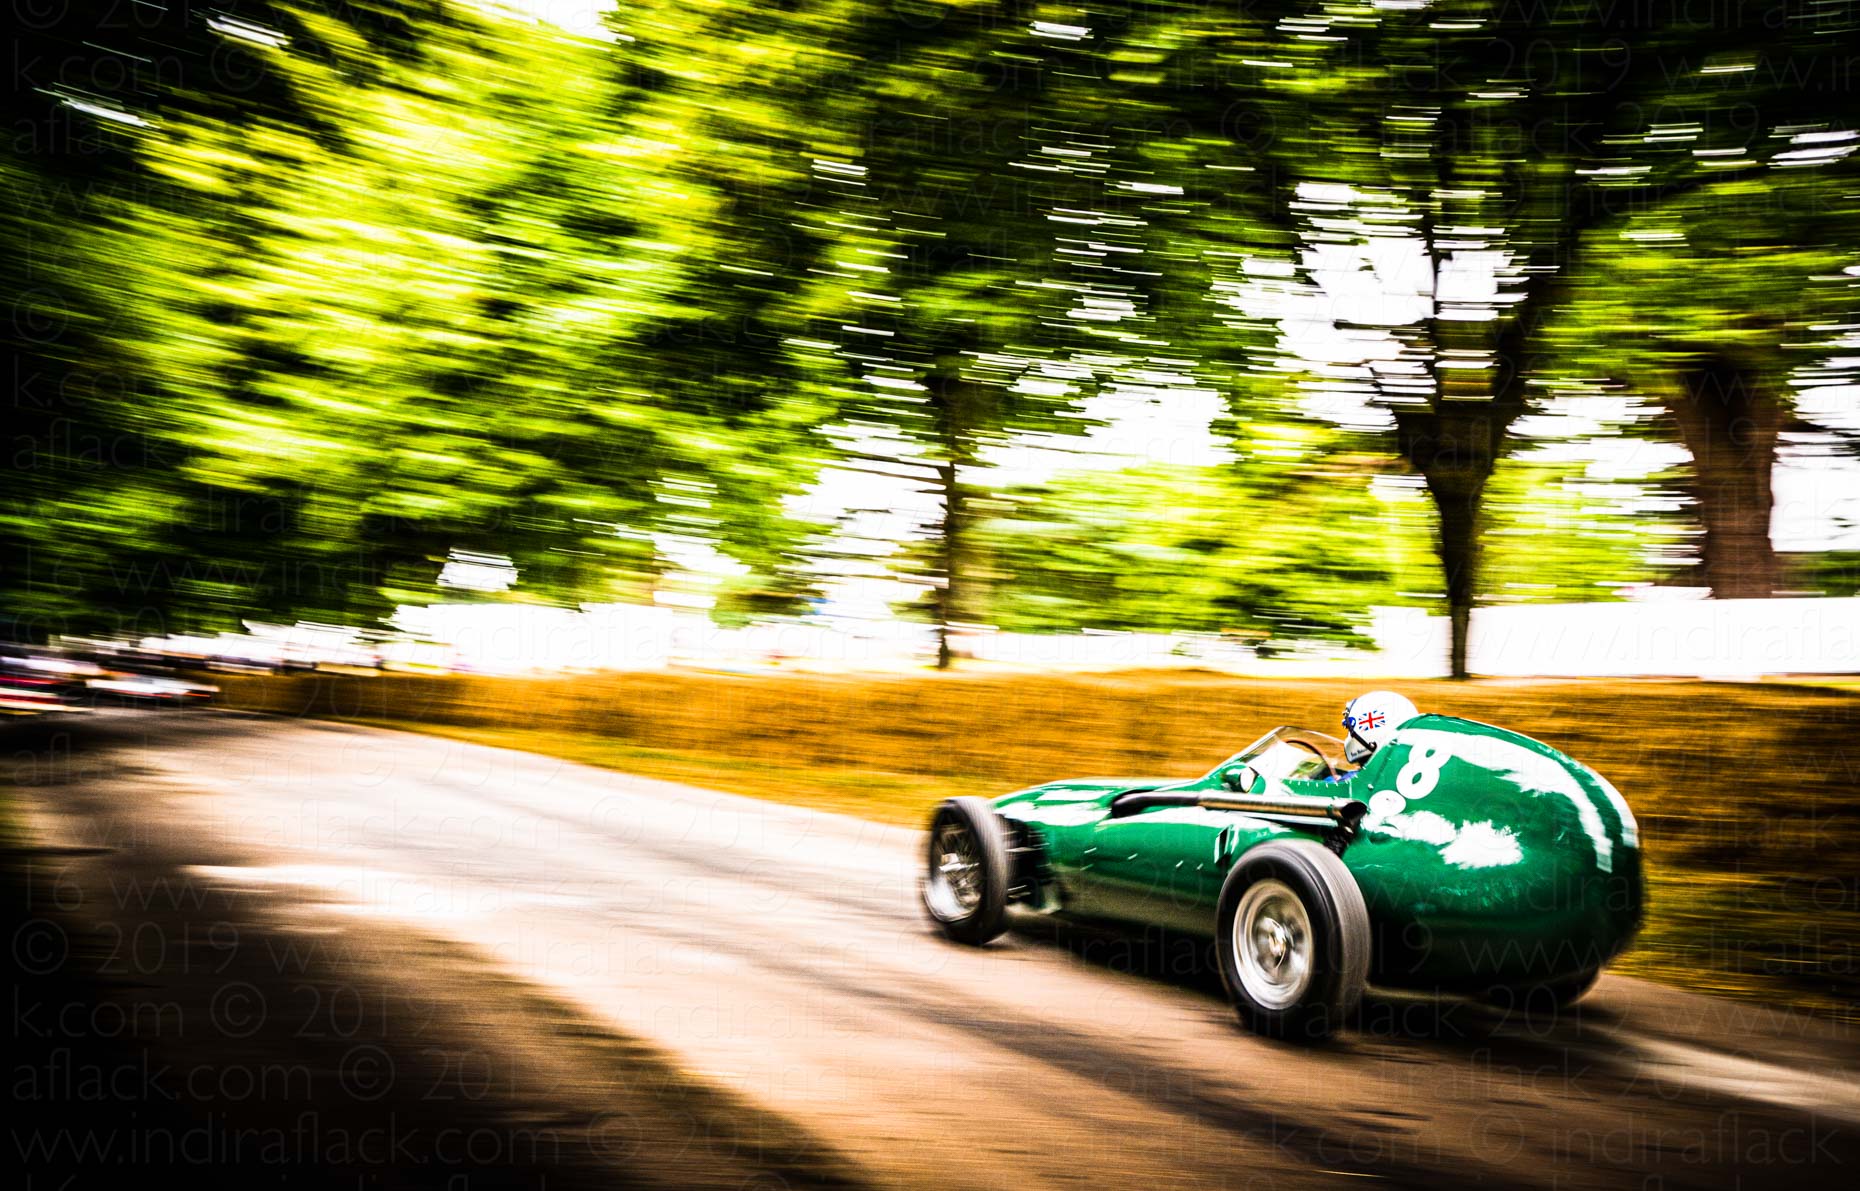 Vanwall driven by Brian Redman ay Festival of Speed Goodwood taken by Indira Flack Photography